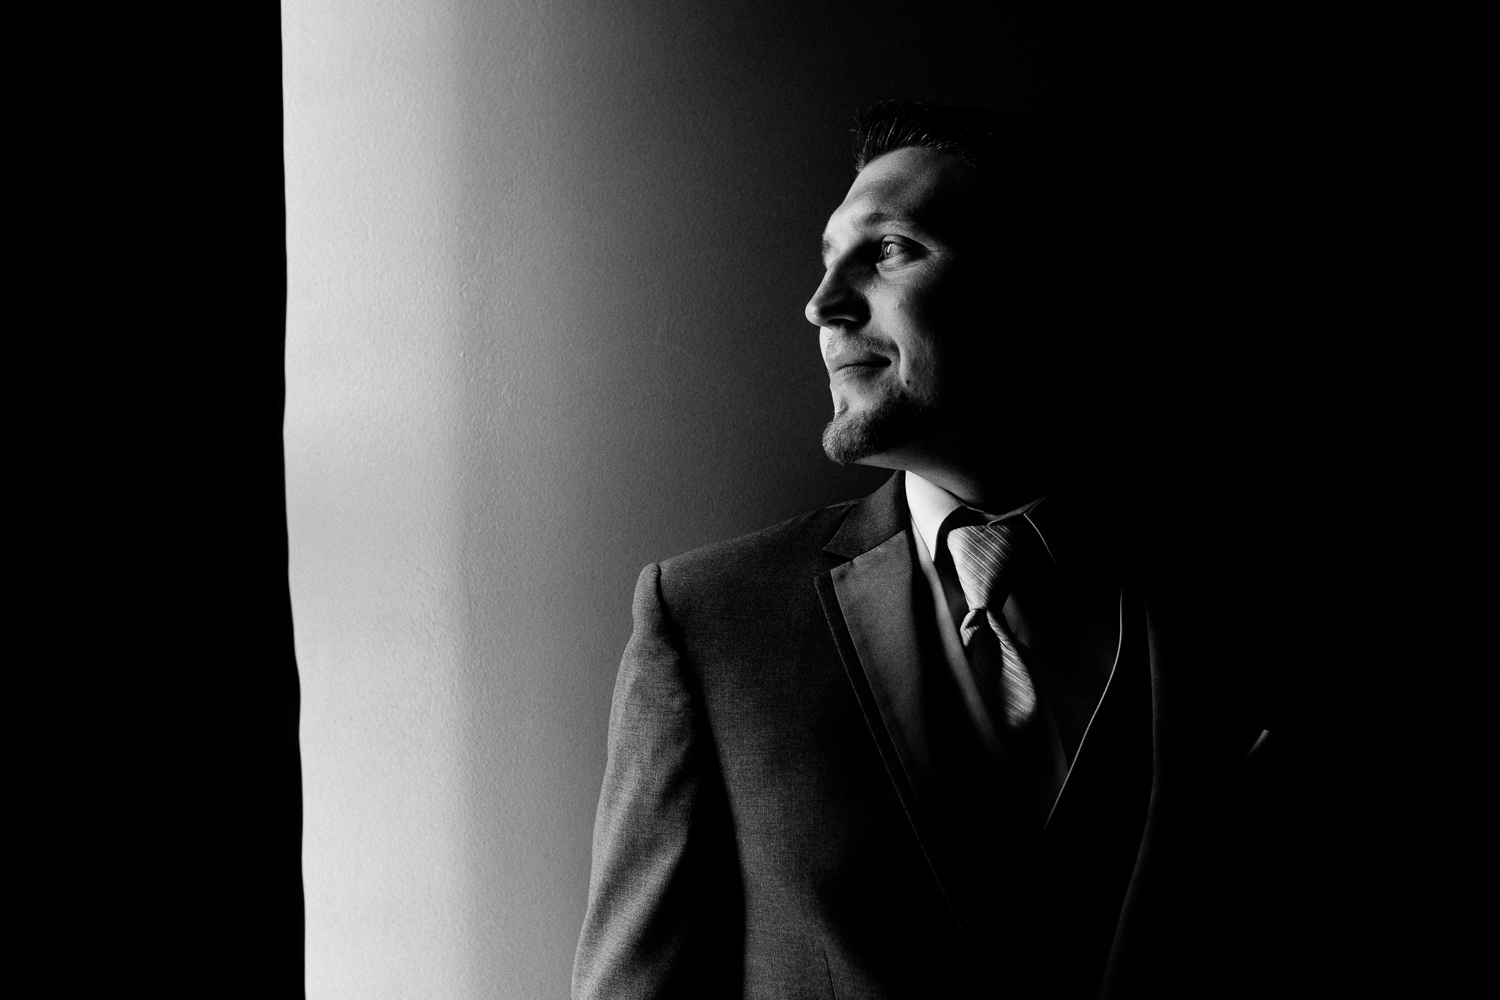  Black and white up close image of a groom looking out a window. He is smiling slightly. 